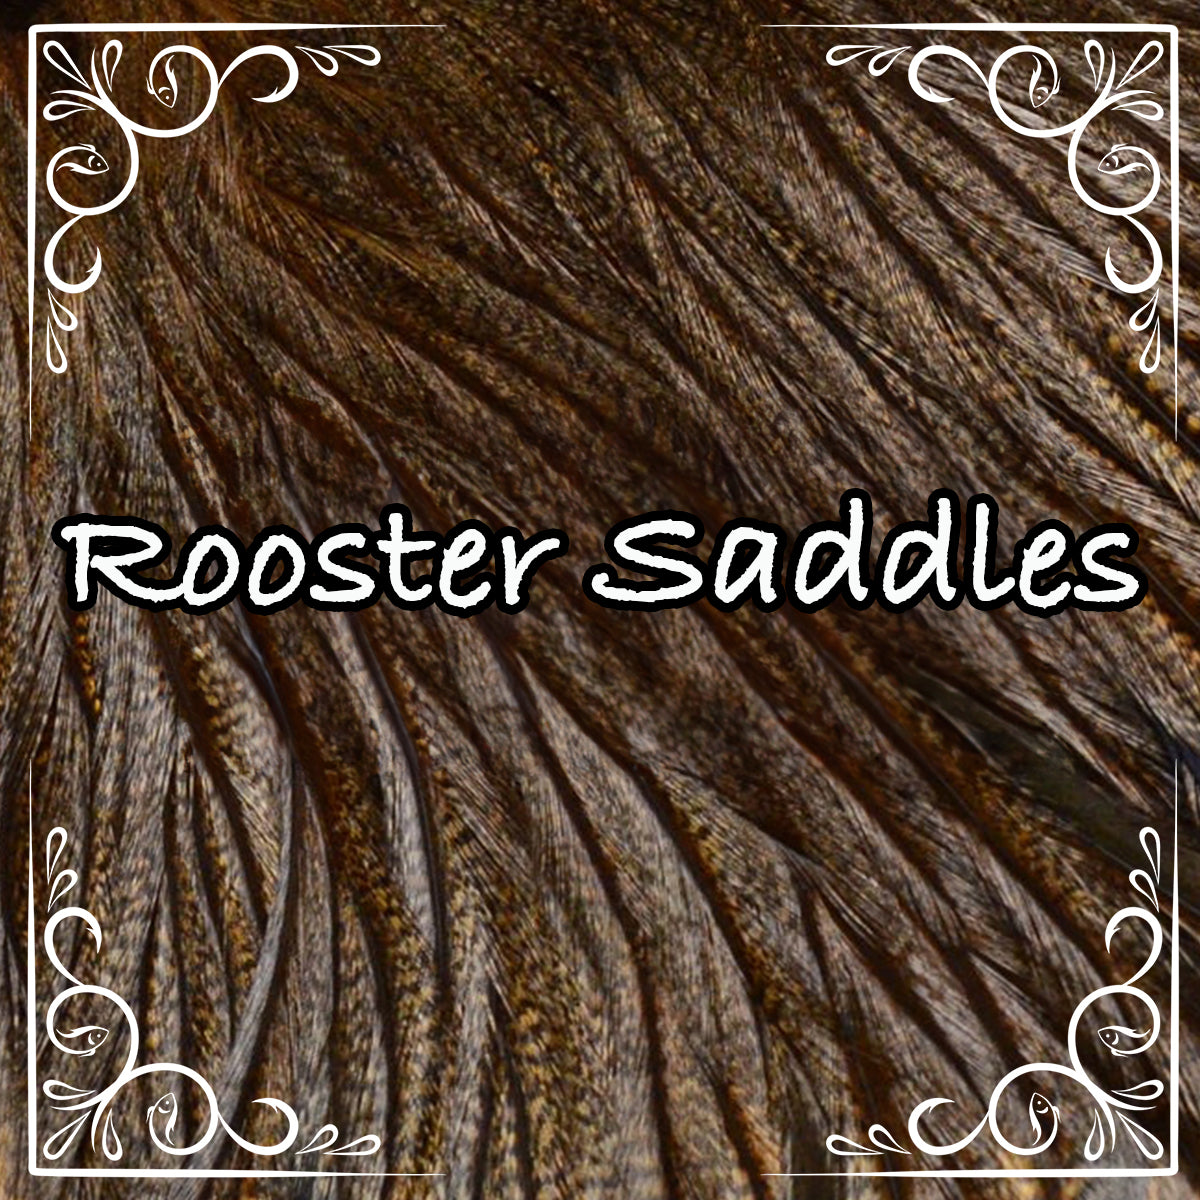 Whiting Rooster Saddles